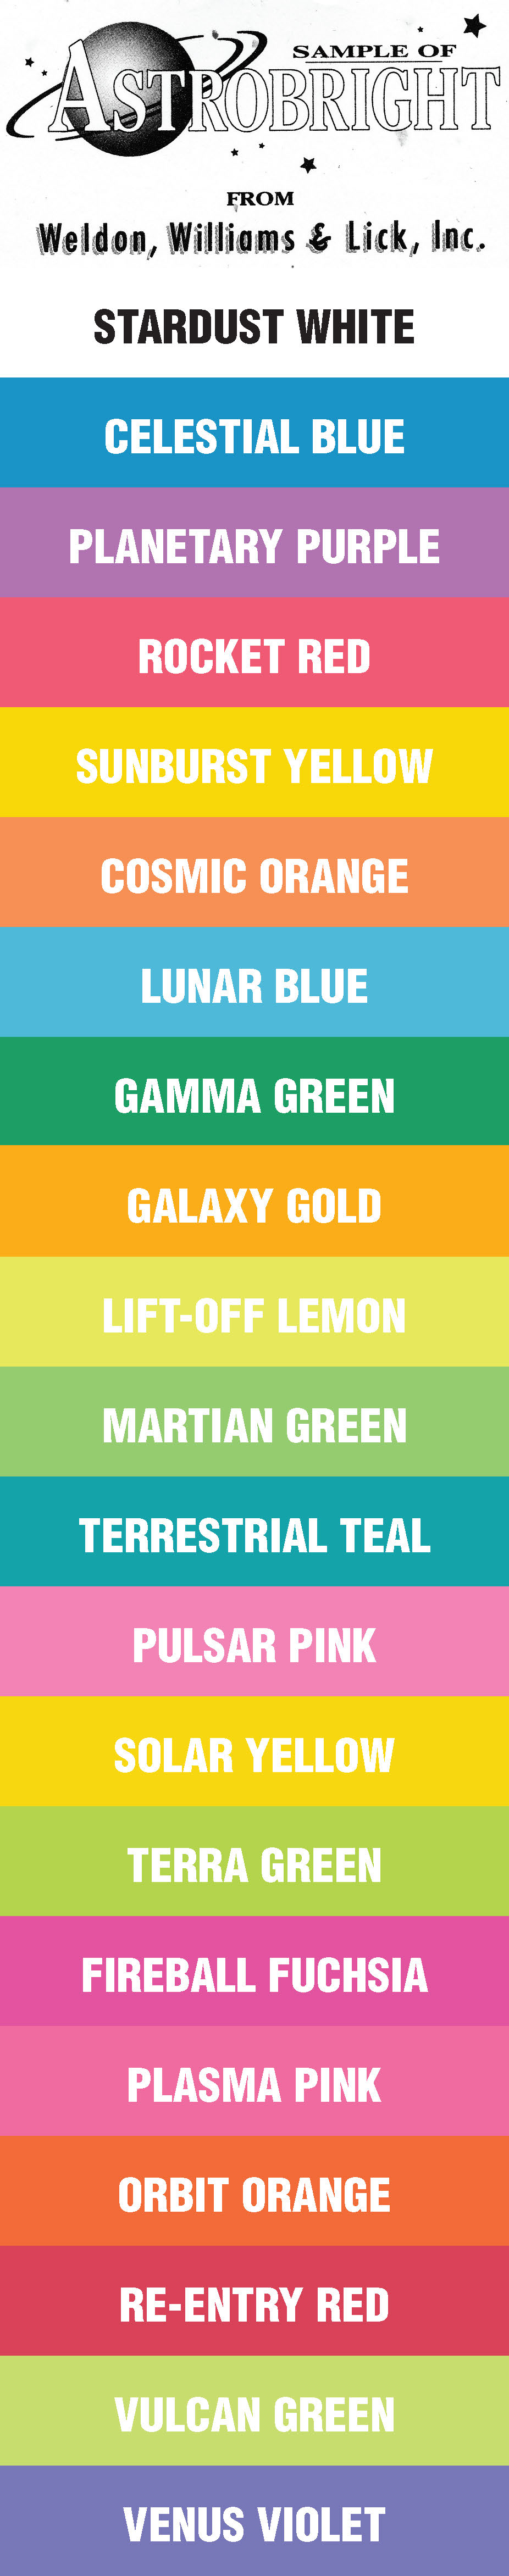 21 Astrobright stock color options